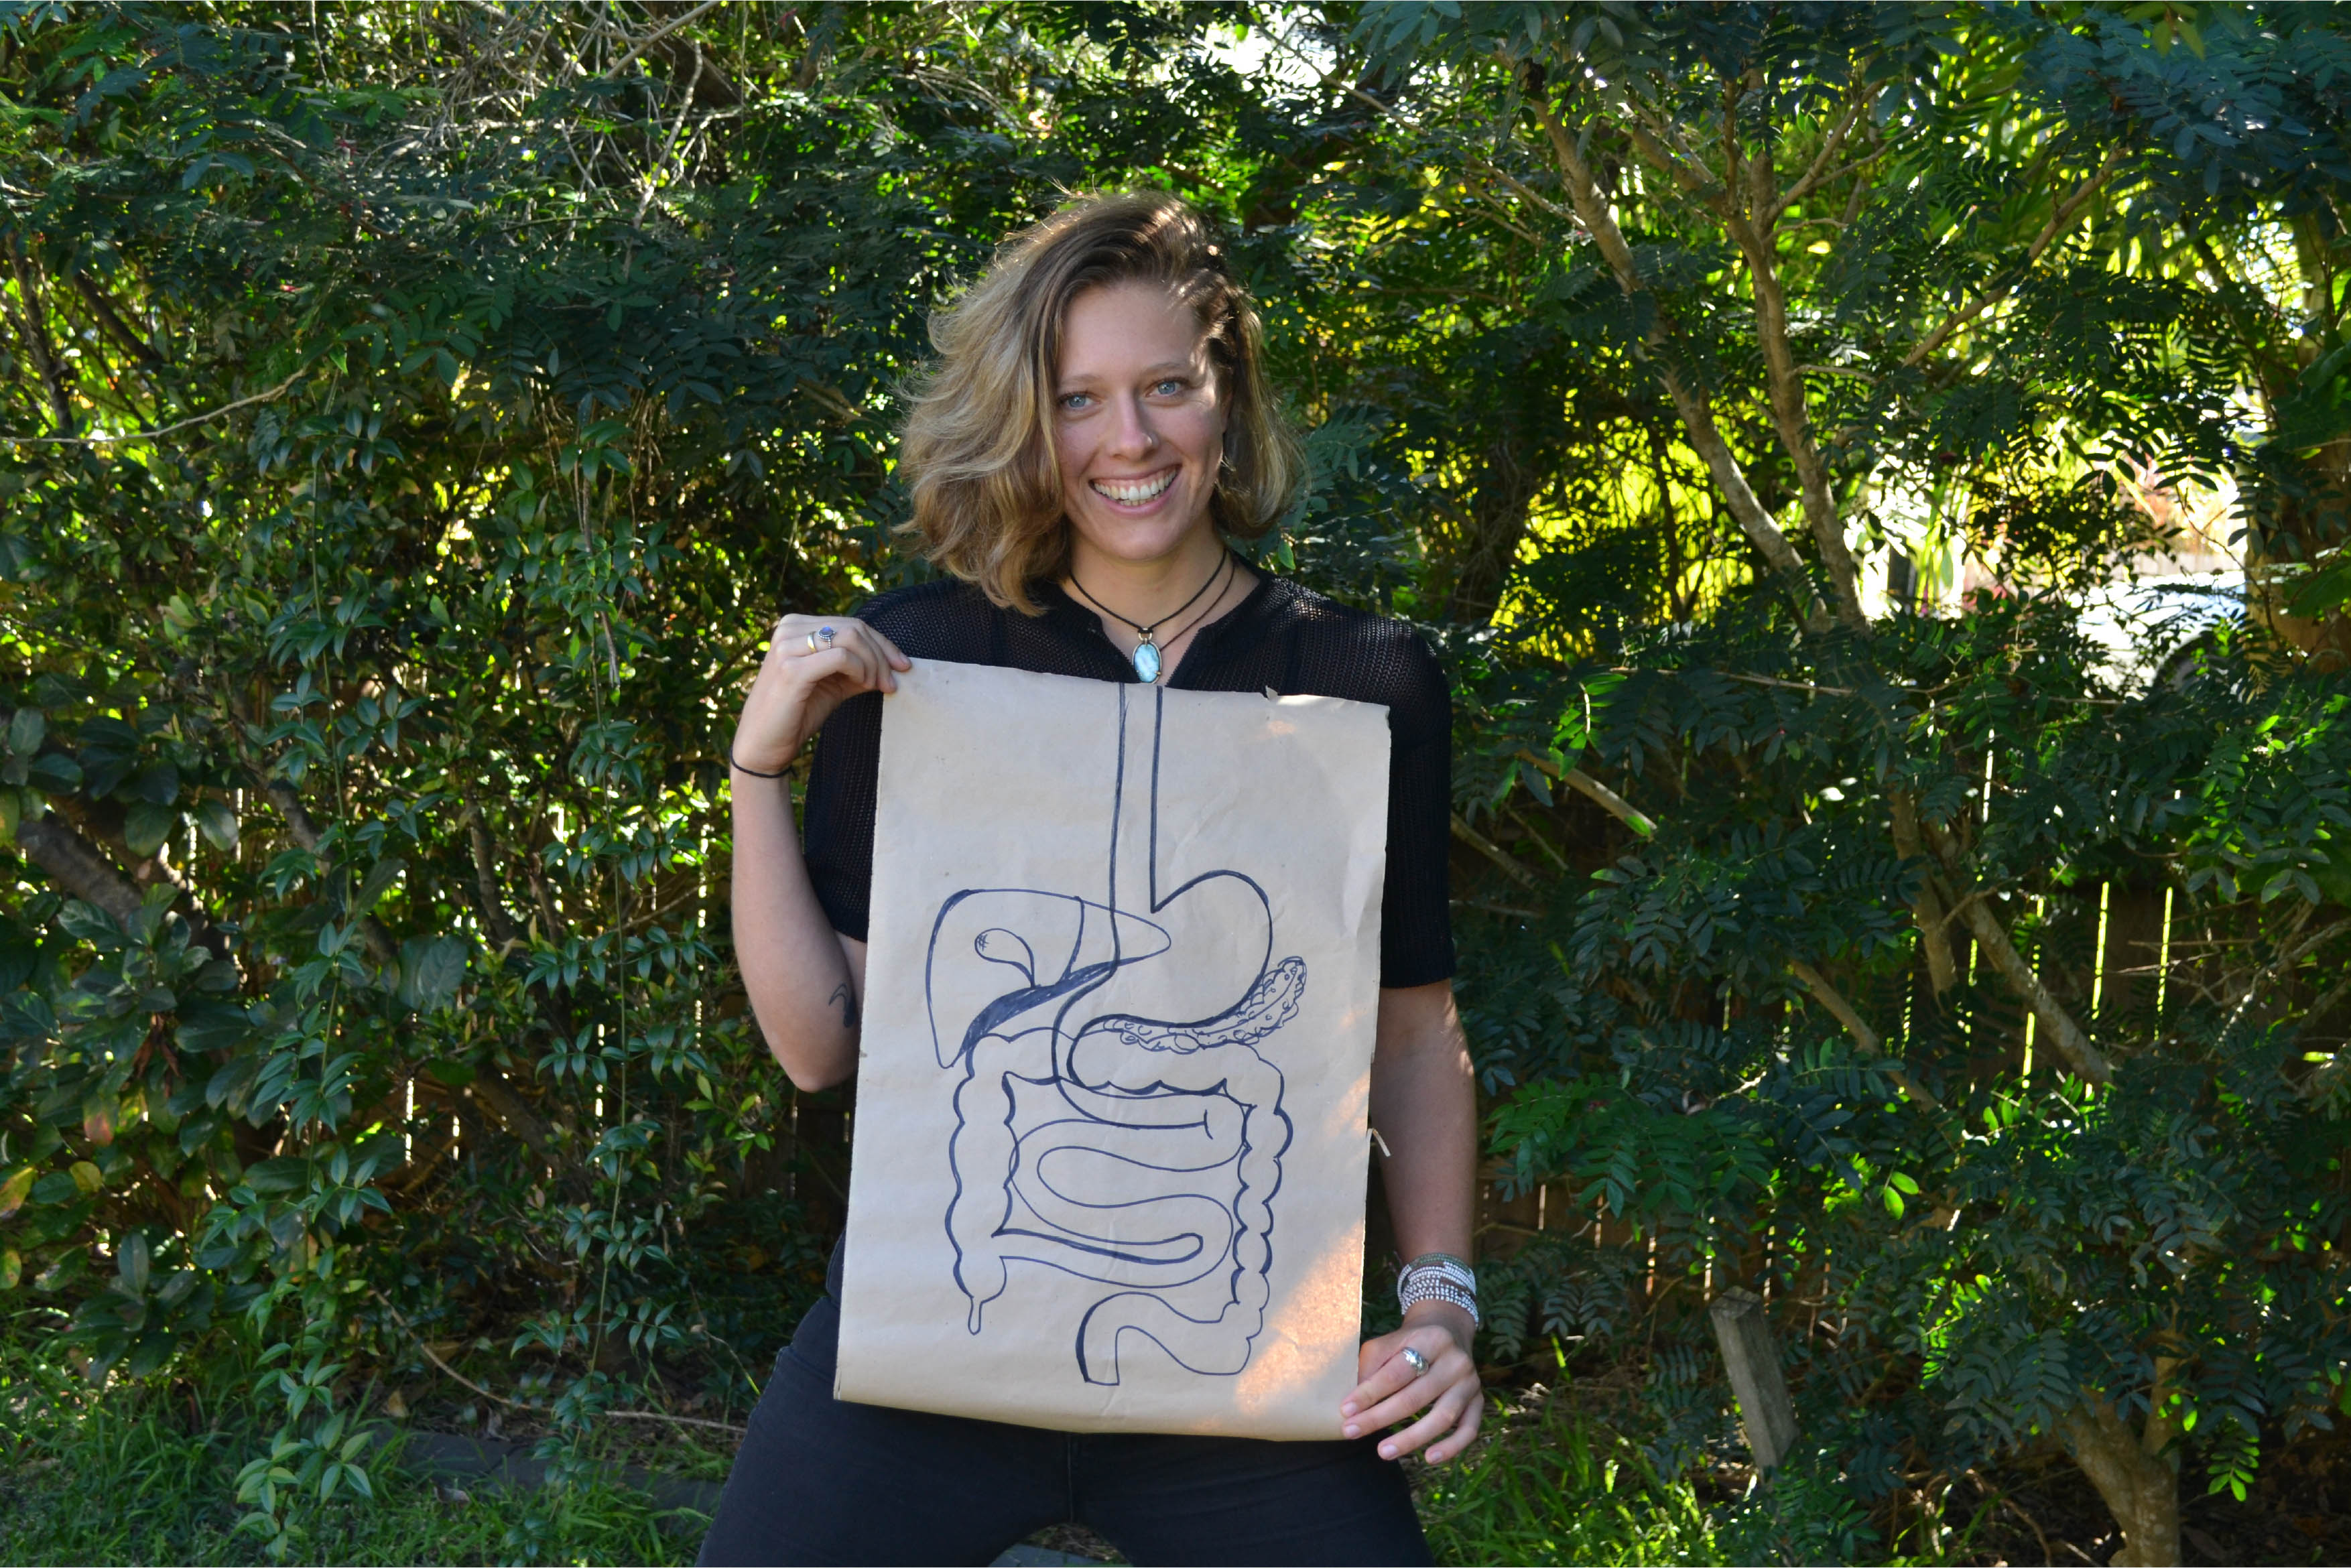  Our nutritionist, Lydia Irving, introduces us to The Small Intestine